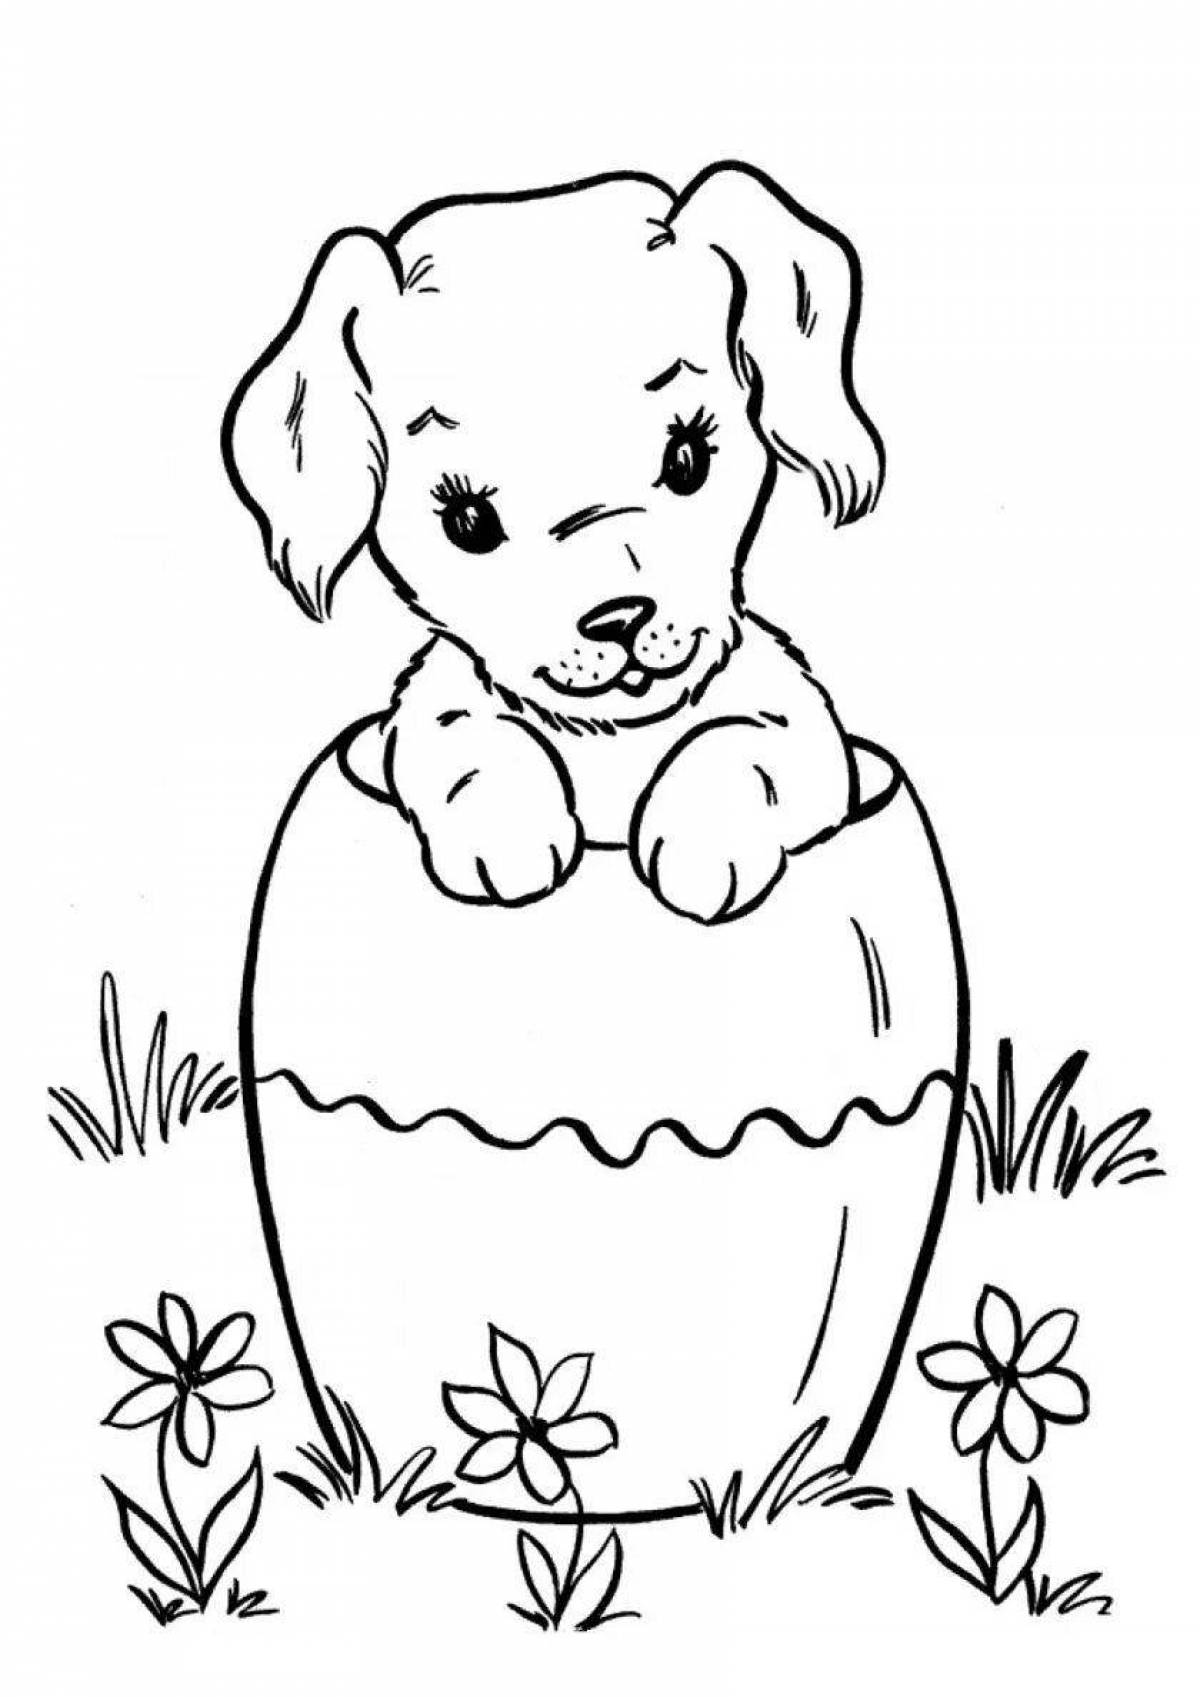 Cute animal dog coloring pages